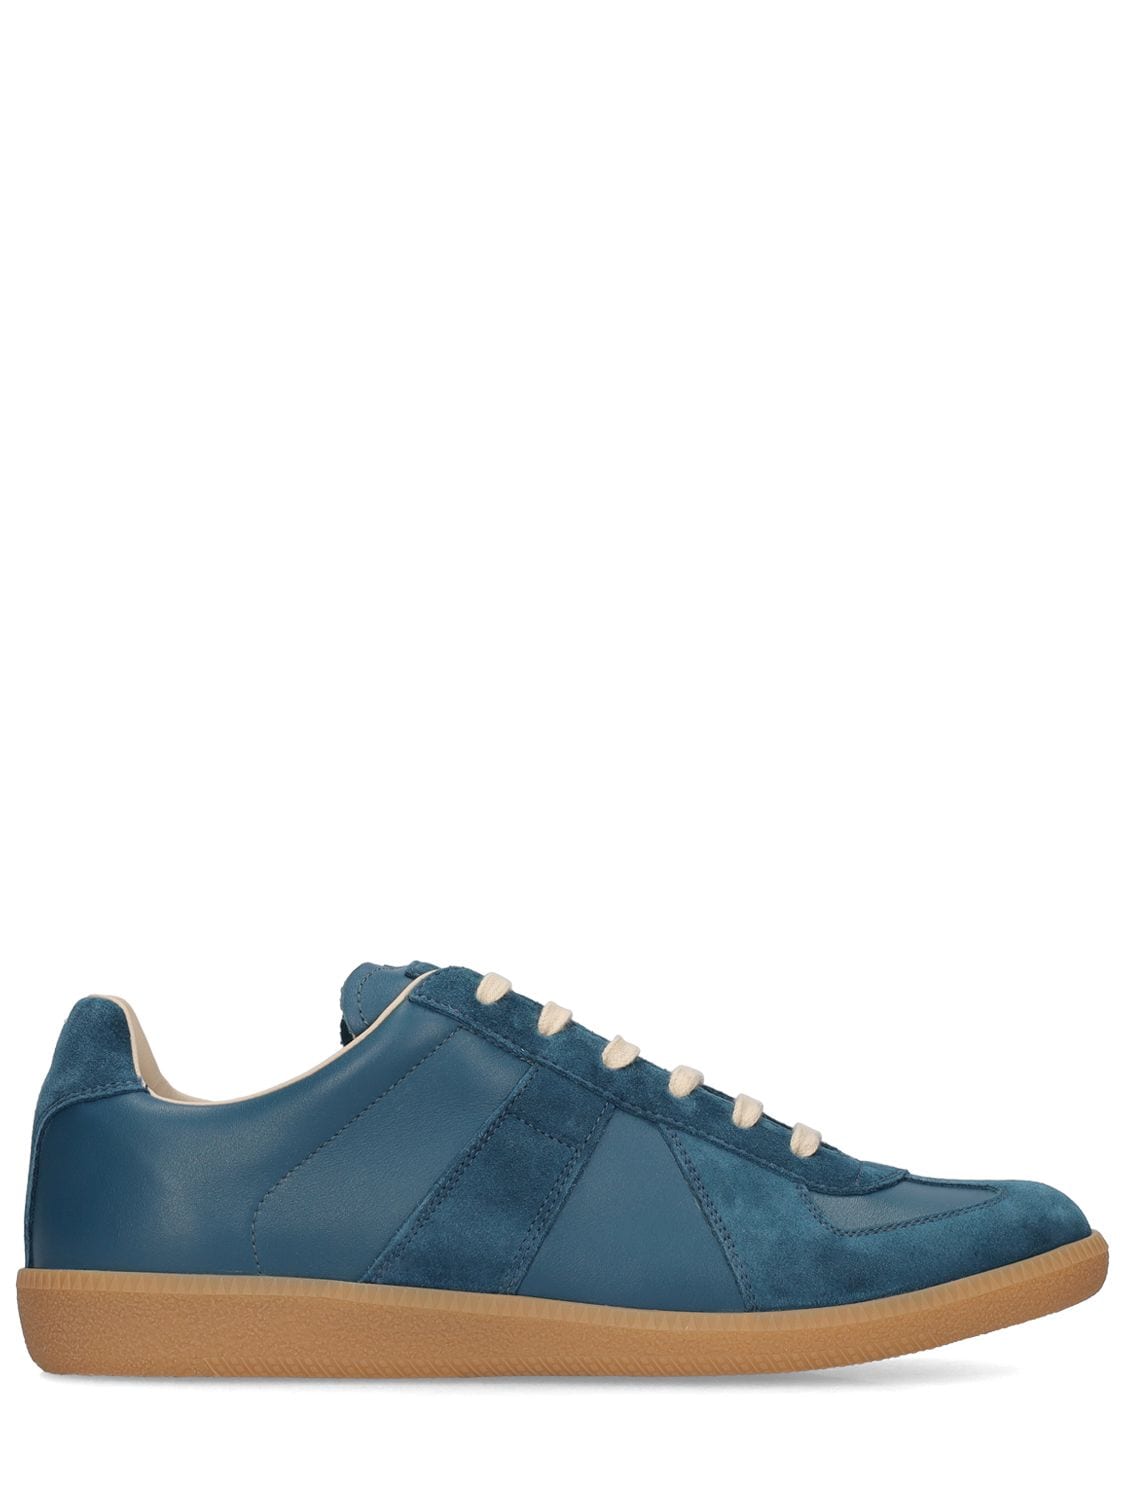 Maison Margiela Blue Replica Suede And Leather Trainers In Octane